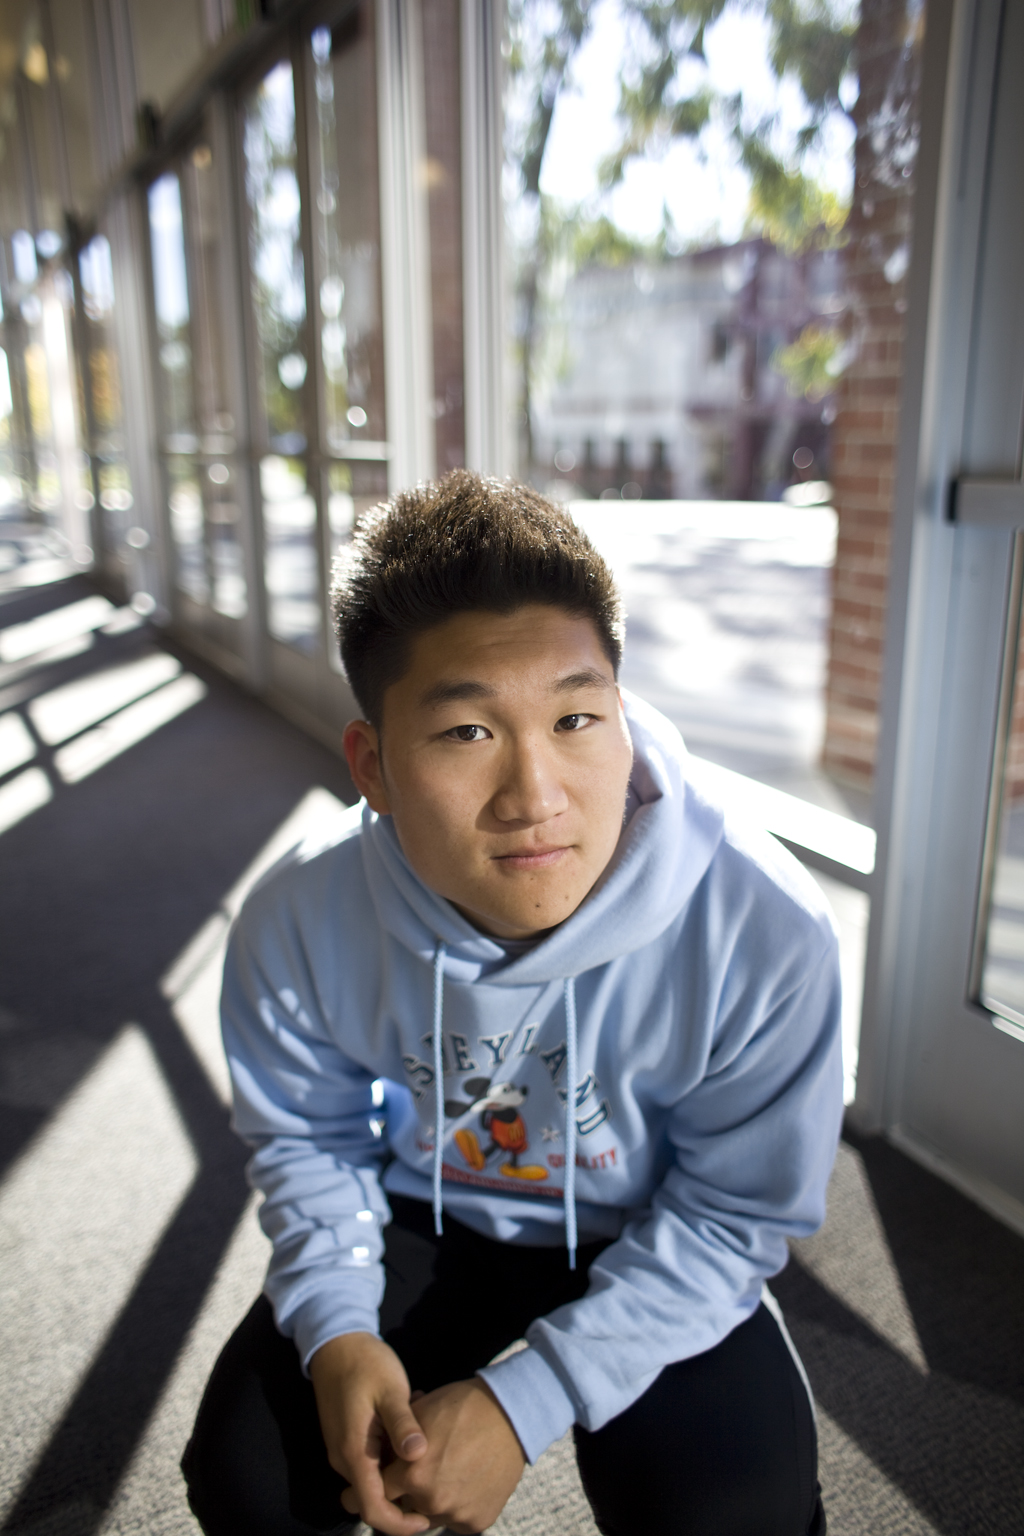 Junior Daniel Han retells the story of his life-changing year traveling the world with YWAM after being kicked out of Biola for doing drugs. BETHANY CISSEL/The Chimes